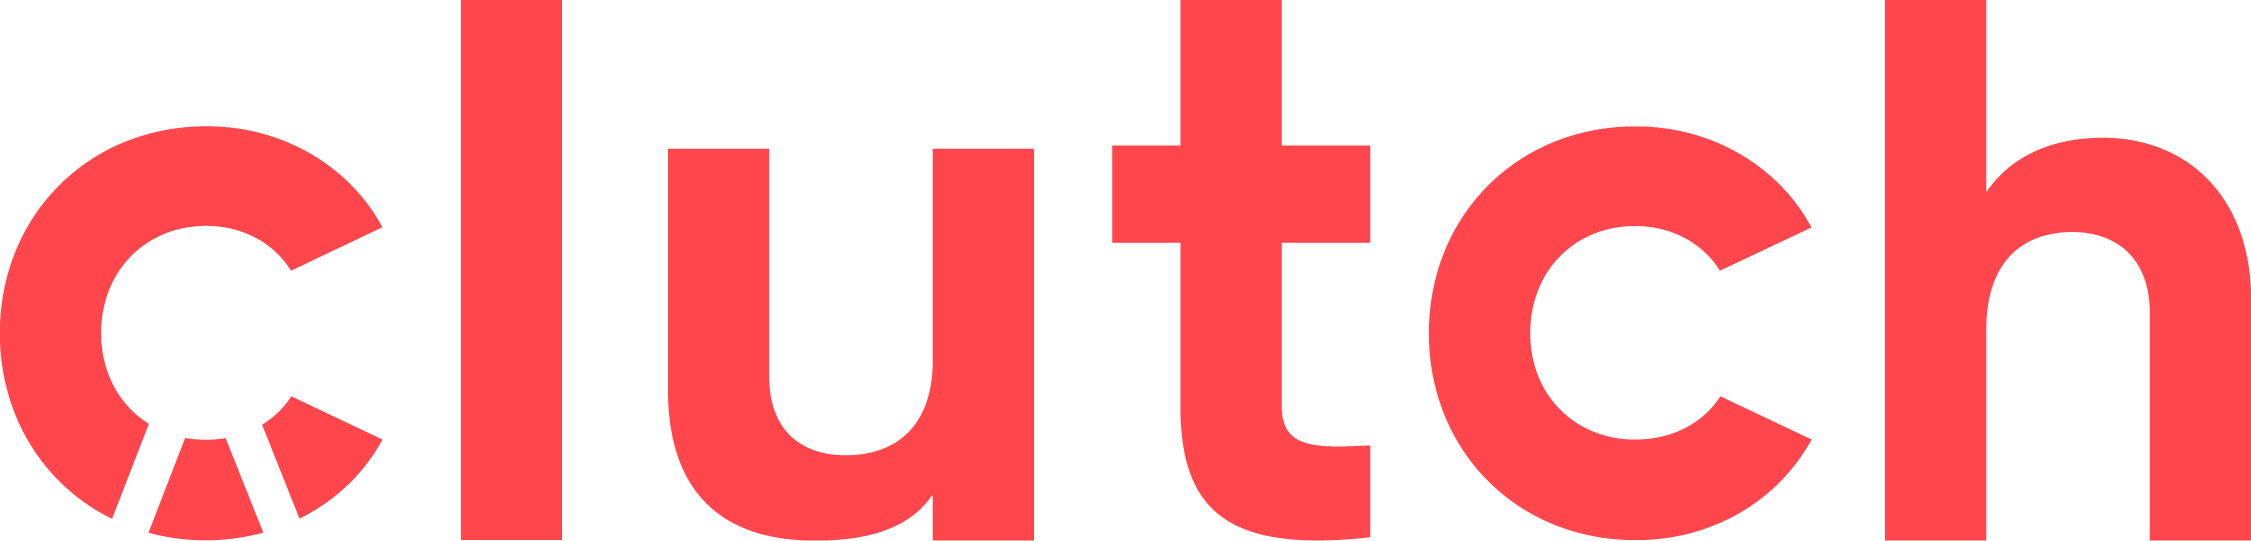 Clutch Logo Red.png